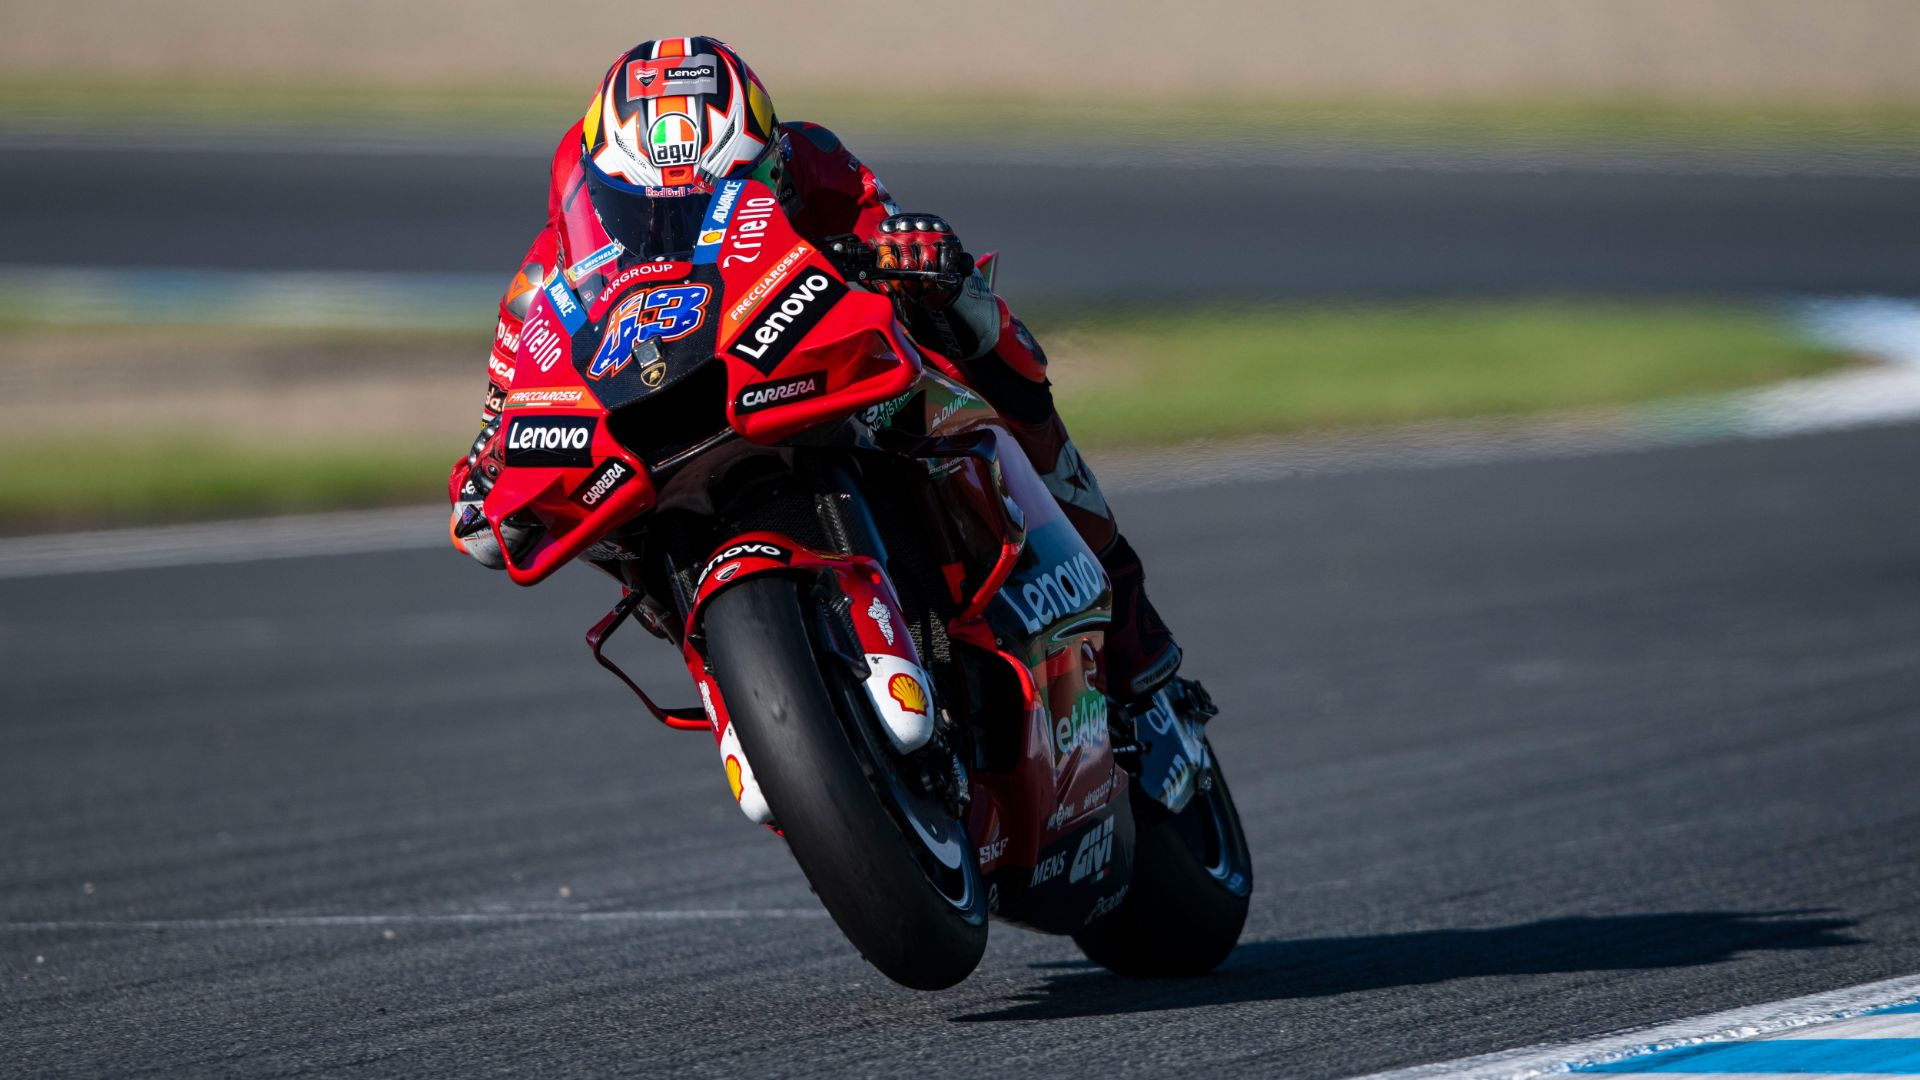 Jack Miller dominates the Japanese GP in Motegi to take his first win of the season.